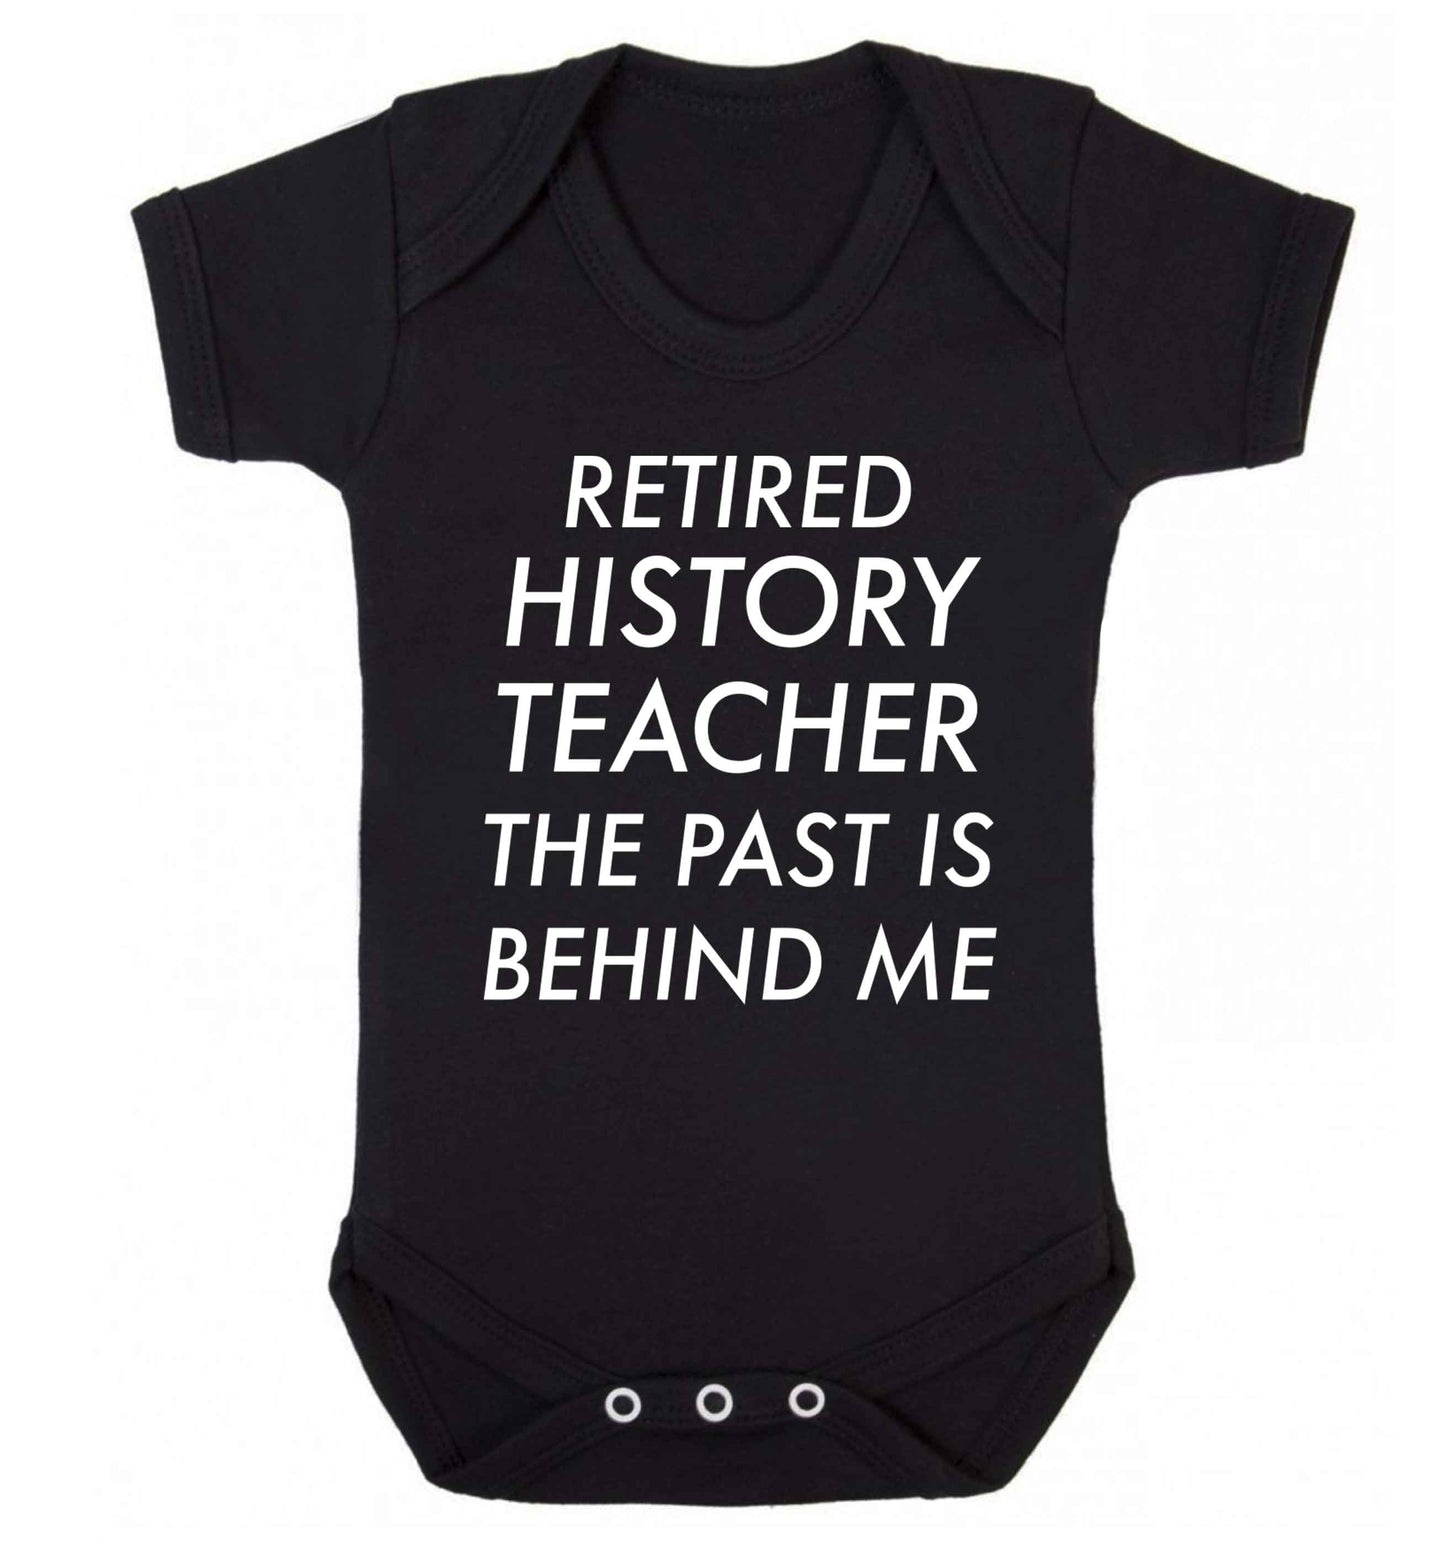 Retired history teacher the past is behind me Baby Vest black 18-24 months